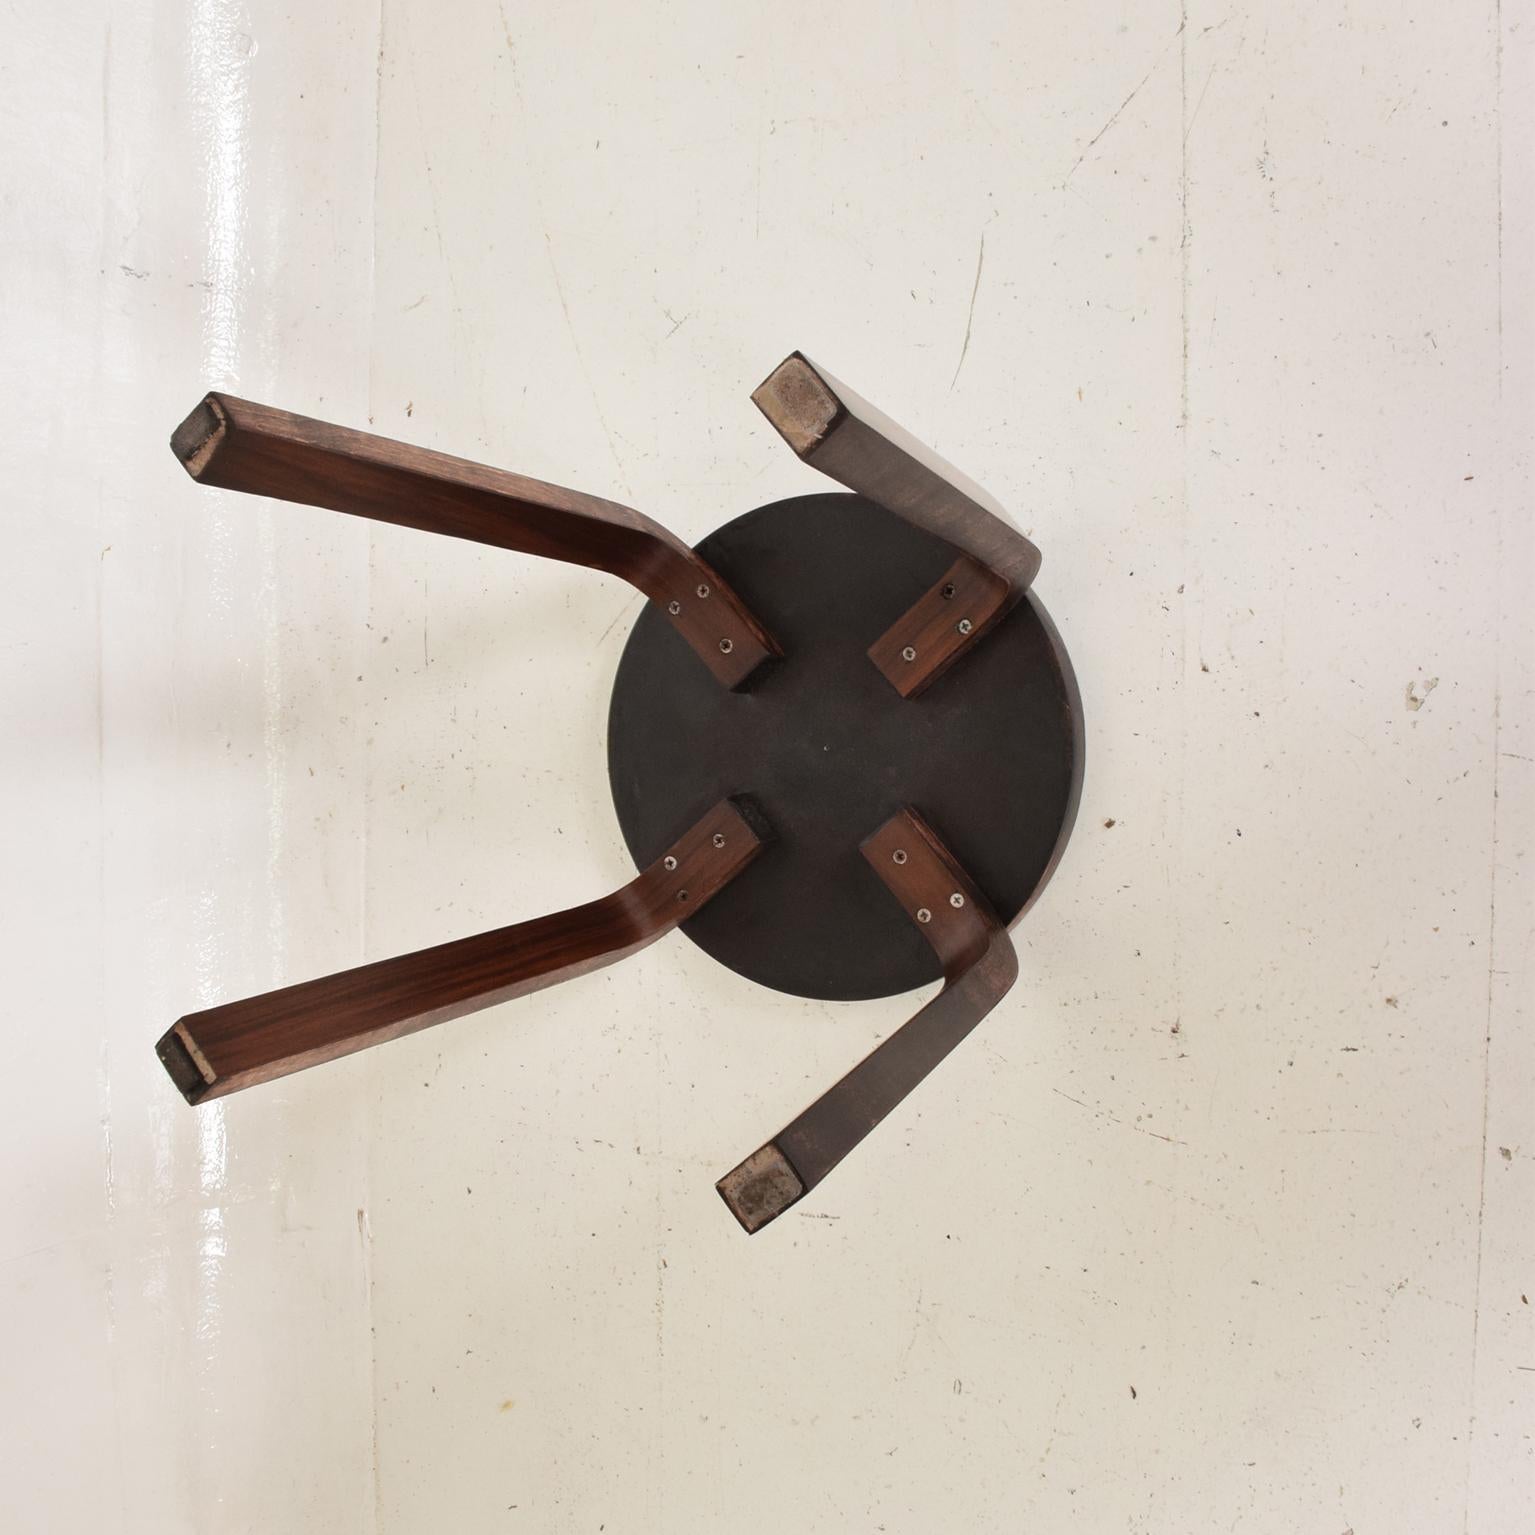 For your consideration, a rare rosewood stool by Alvar Aalto for Artek.

Dimensions: 13 3/4